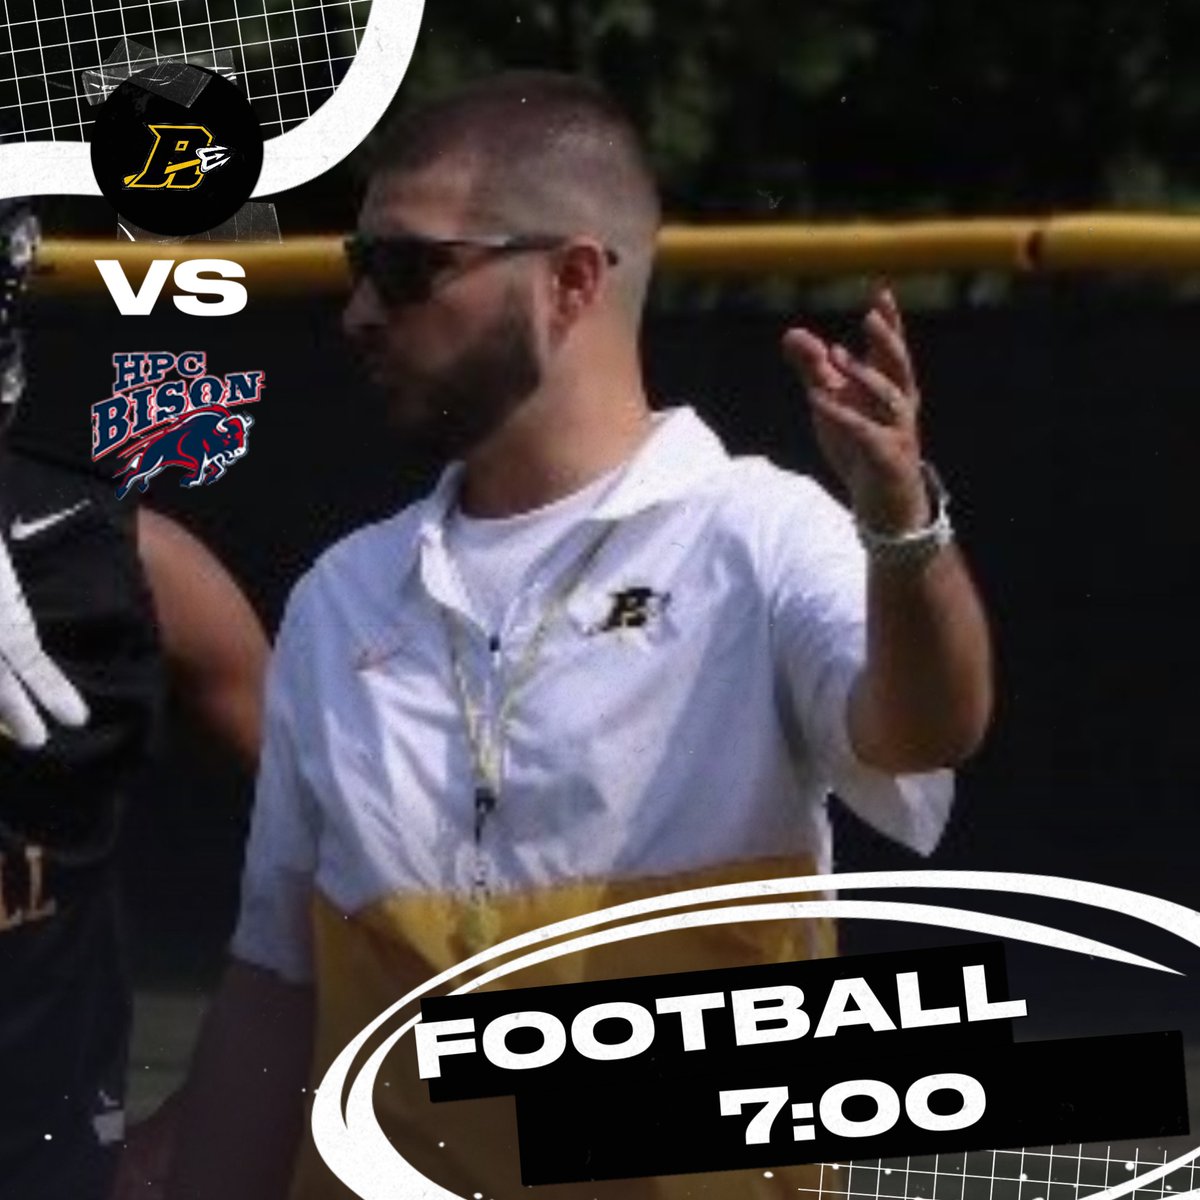 The Coach Davidyock era begins tonight at Deaton-Thompson Stadium. Demons take on the Bison of High Point Central. Kickoff is 7:00. All tickets are sold on GoFan or you can use a card at the gate. No cash sales.